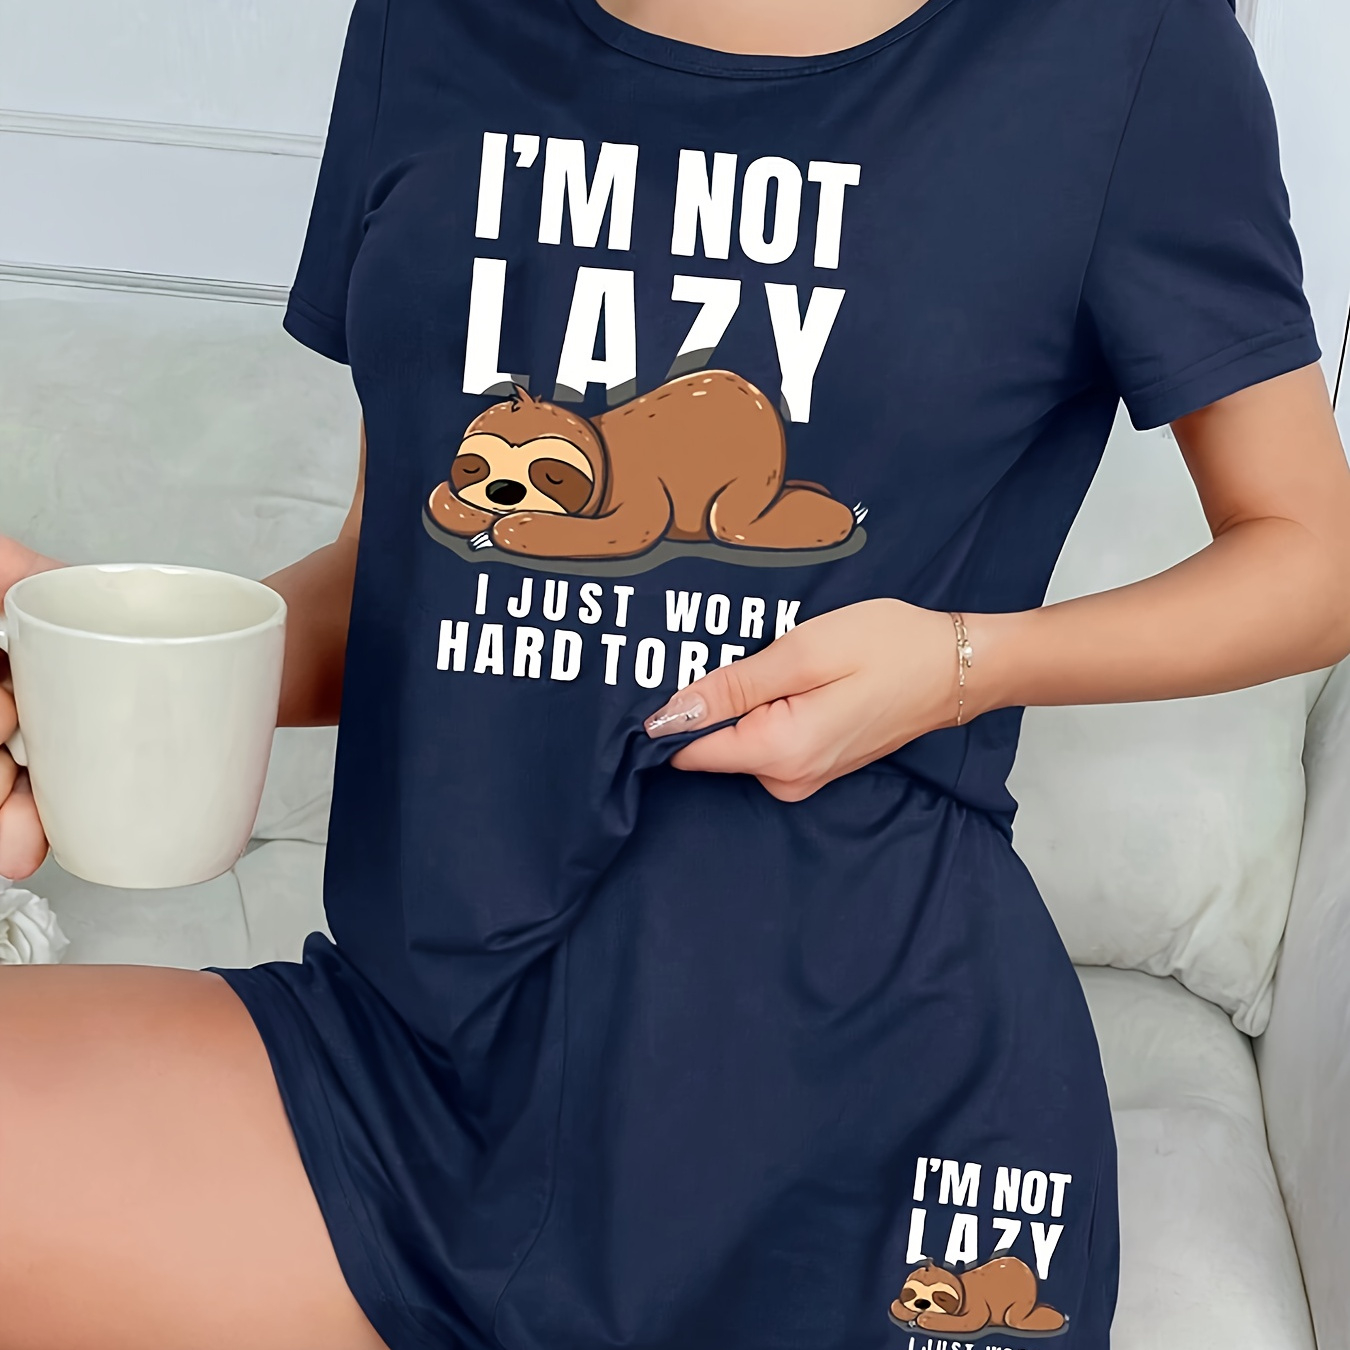 

Women's Cute Sloth & Slogan Print Pajama Set, Short Sleeve Round Neck Top & Shorts, Comfortable Relaxed Fit